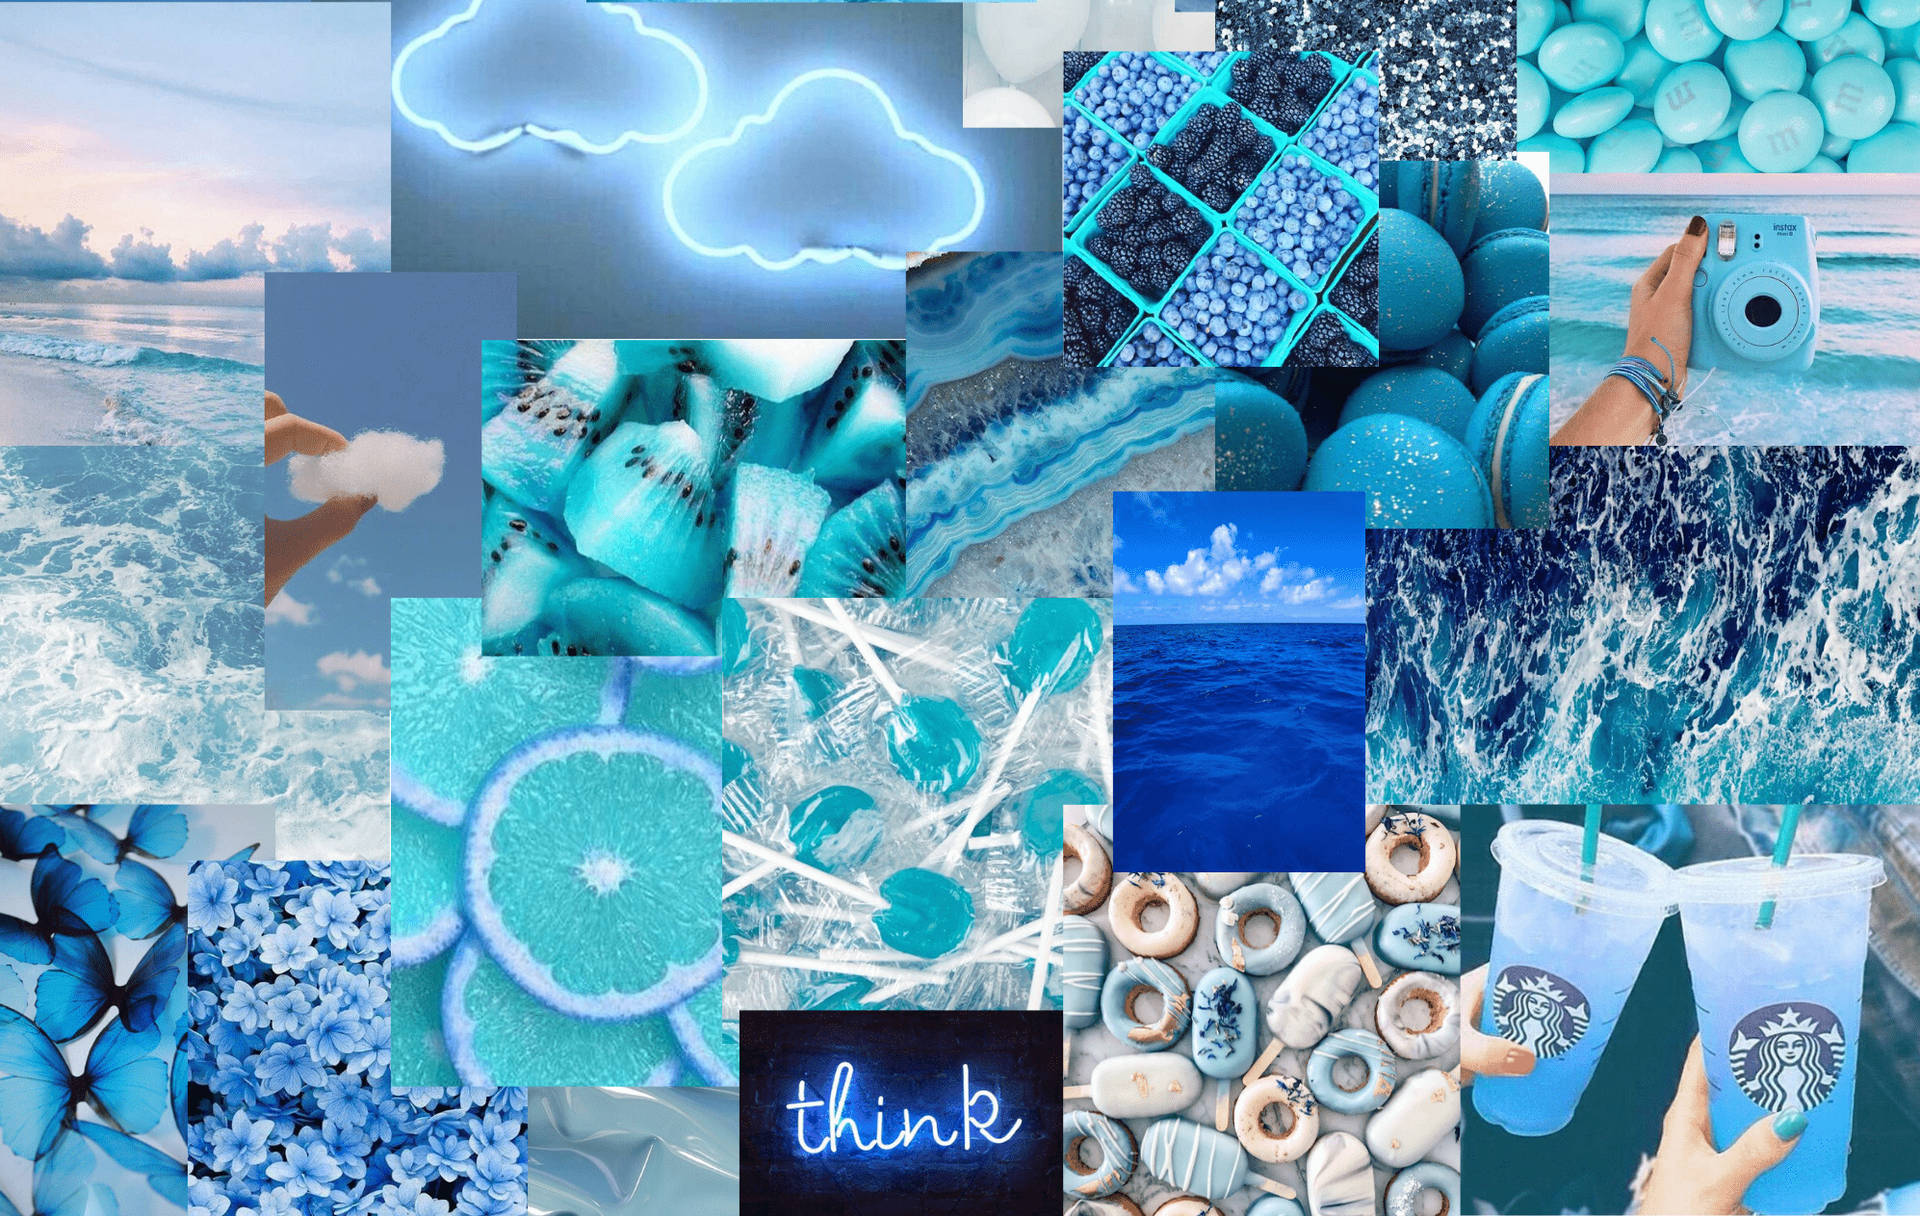 Free Aesthetic Collage Wallpaper Downloads, [300+] Aesthetic Collage  Wallpapers for FREE 